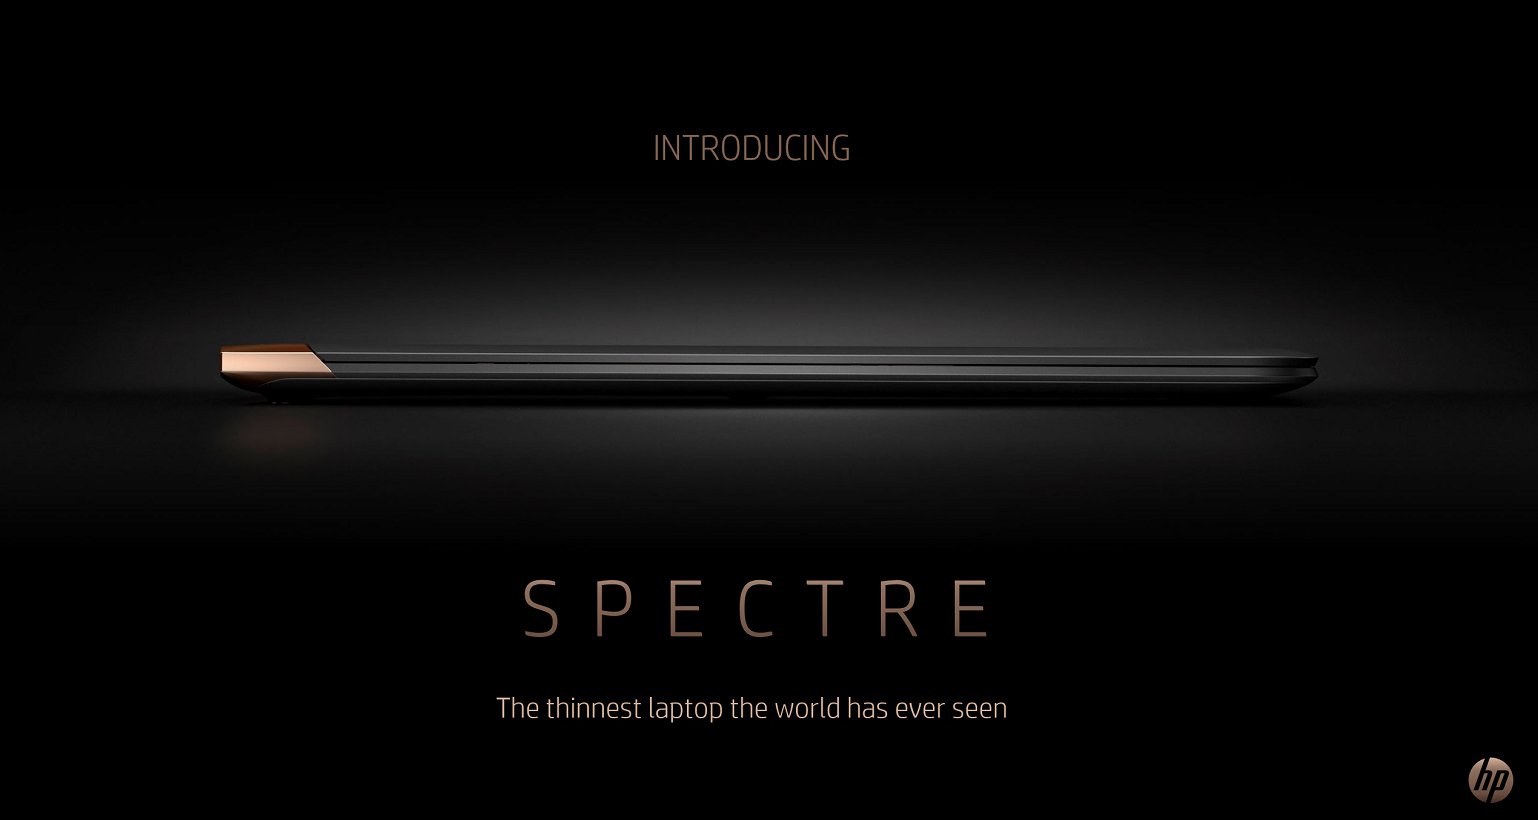 HP Spectre 13 ‘World’s Thinnest Laptop’ Announced In India